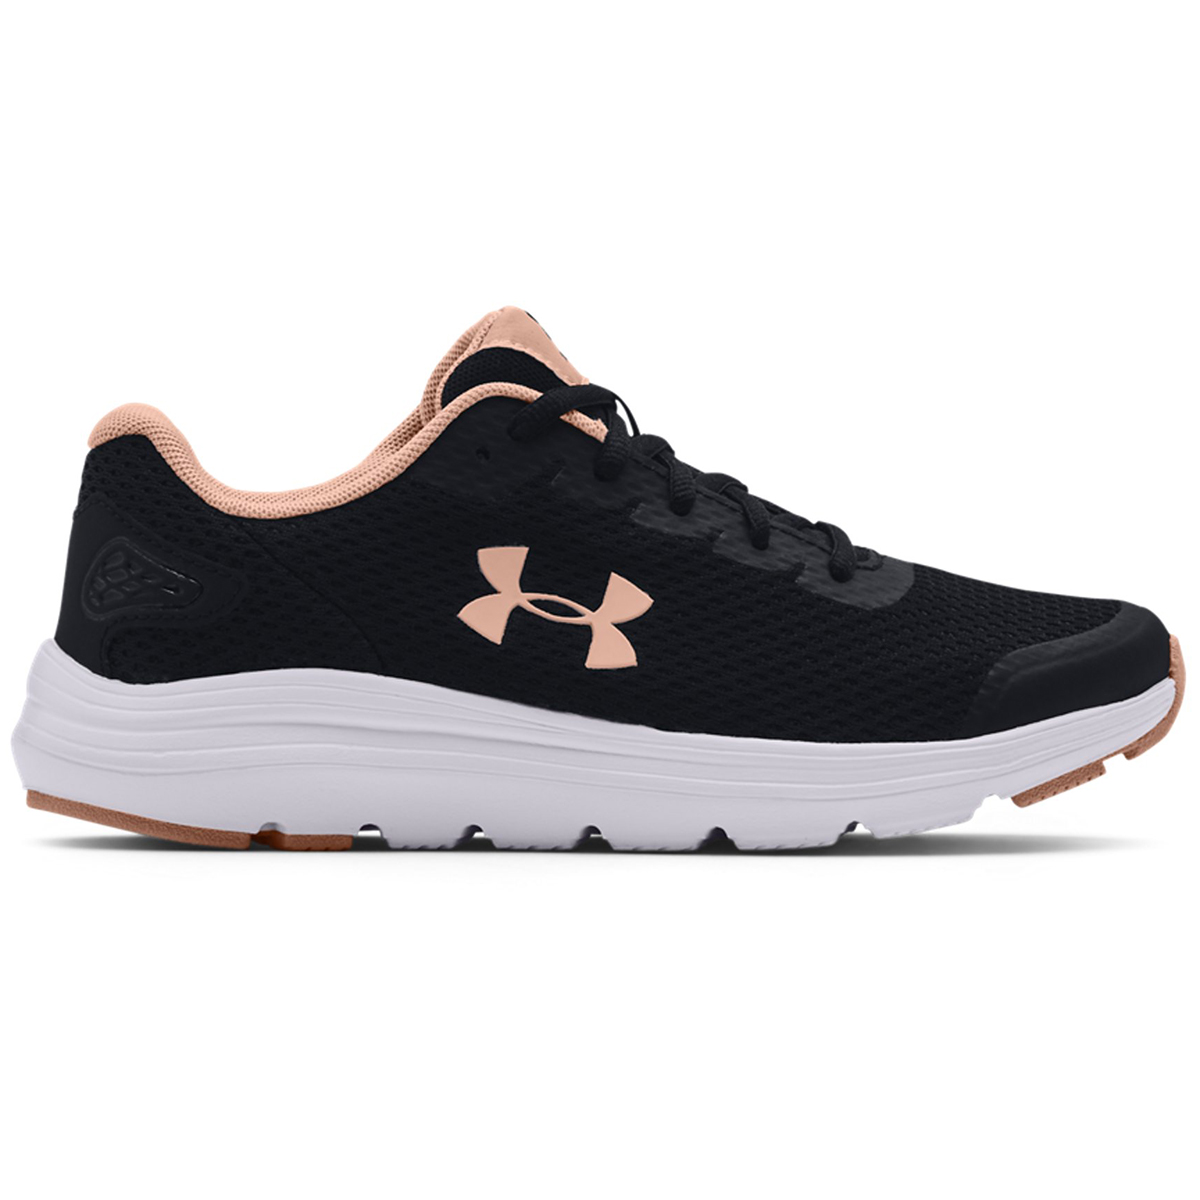 Under Armour Women's Ua Surge 2 Running Shoes